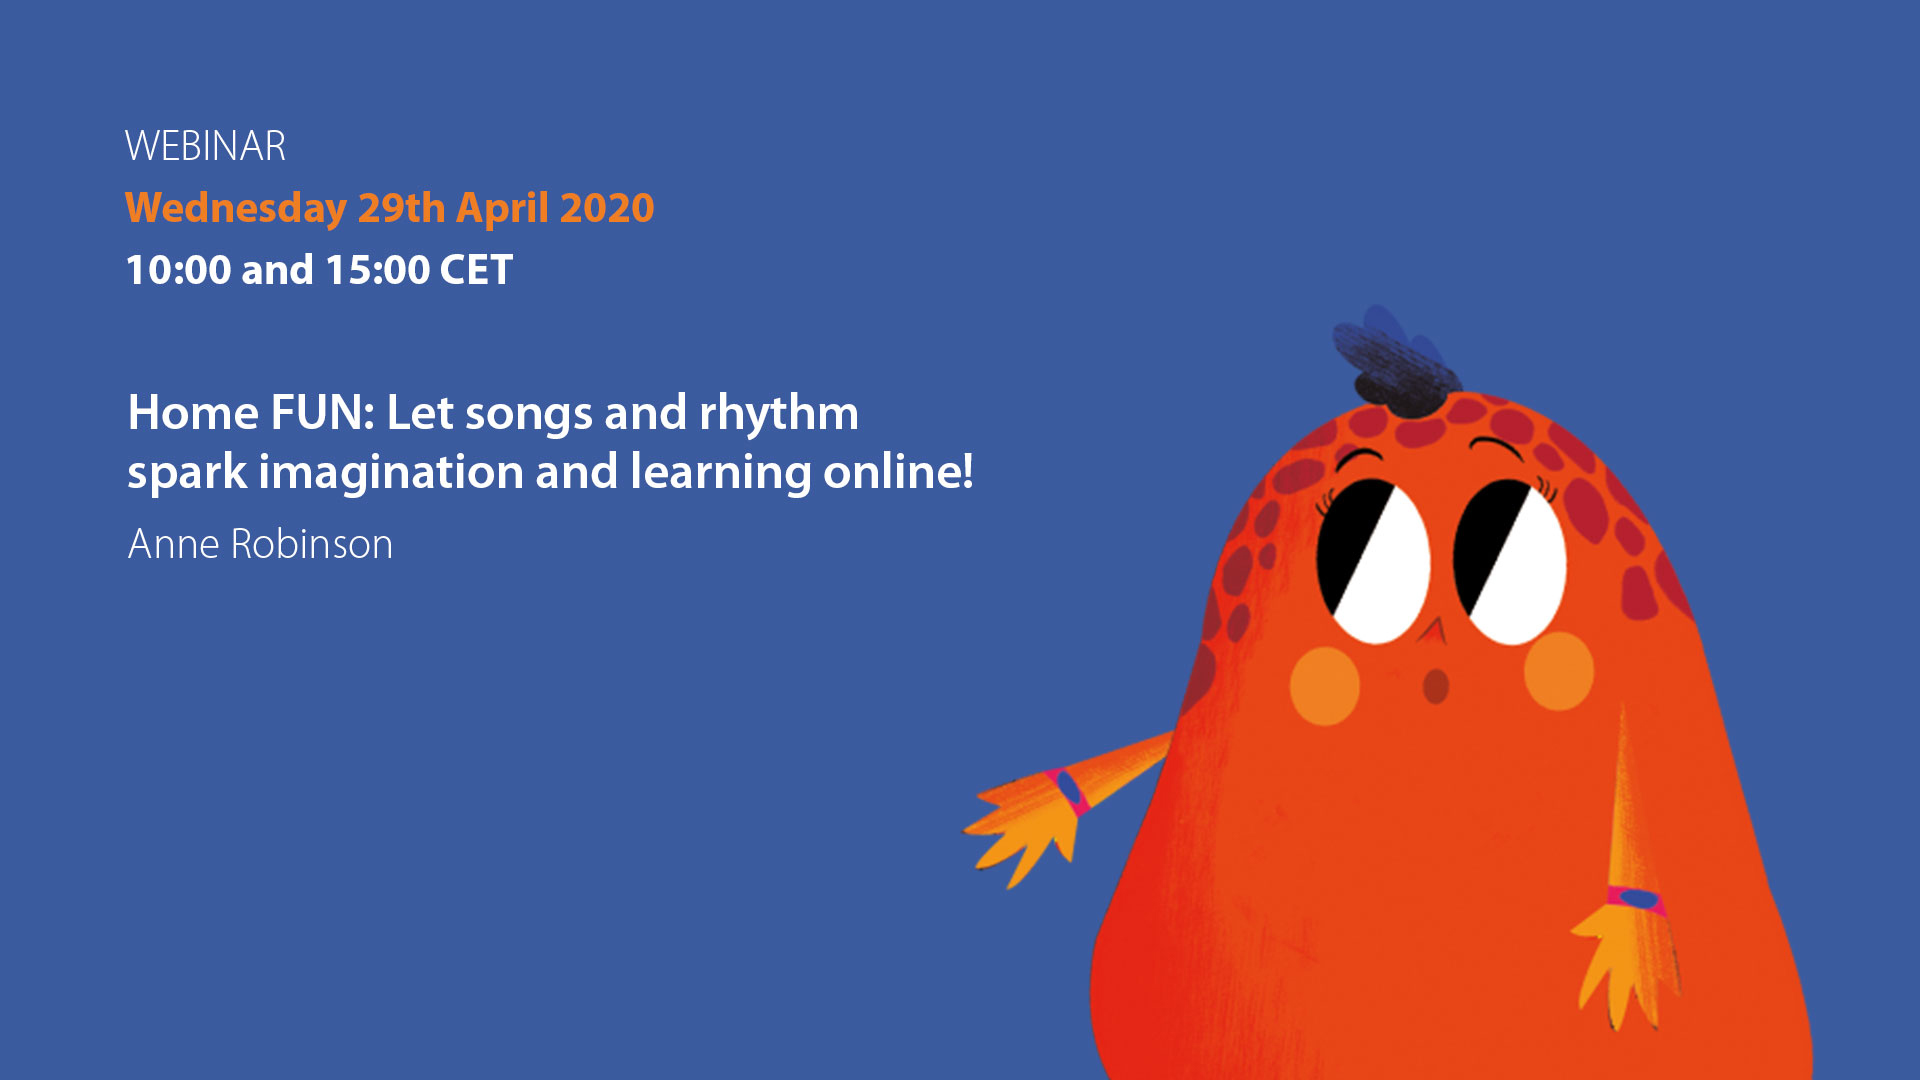 Home FUN: Let songs and rhythm spark imagination and learning online! – with Anne Robinson